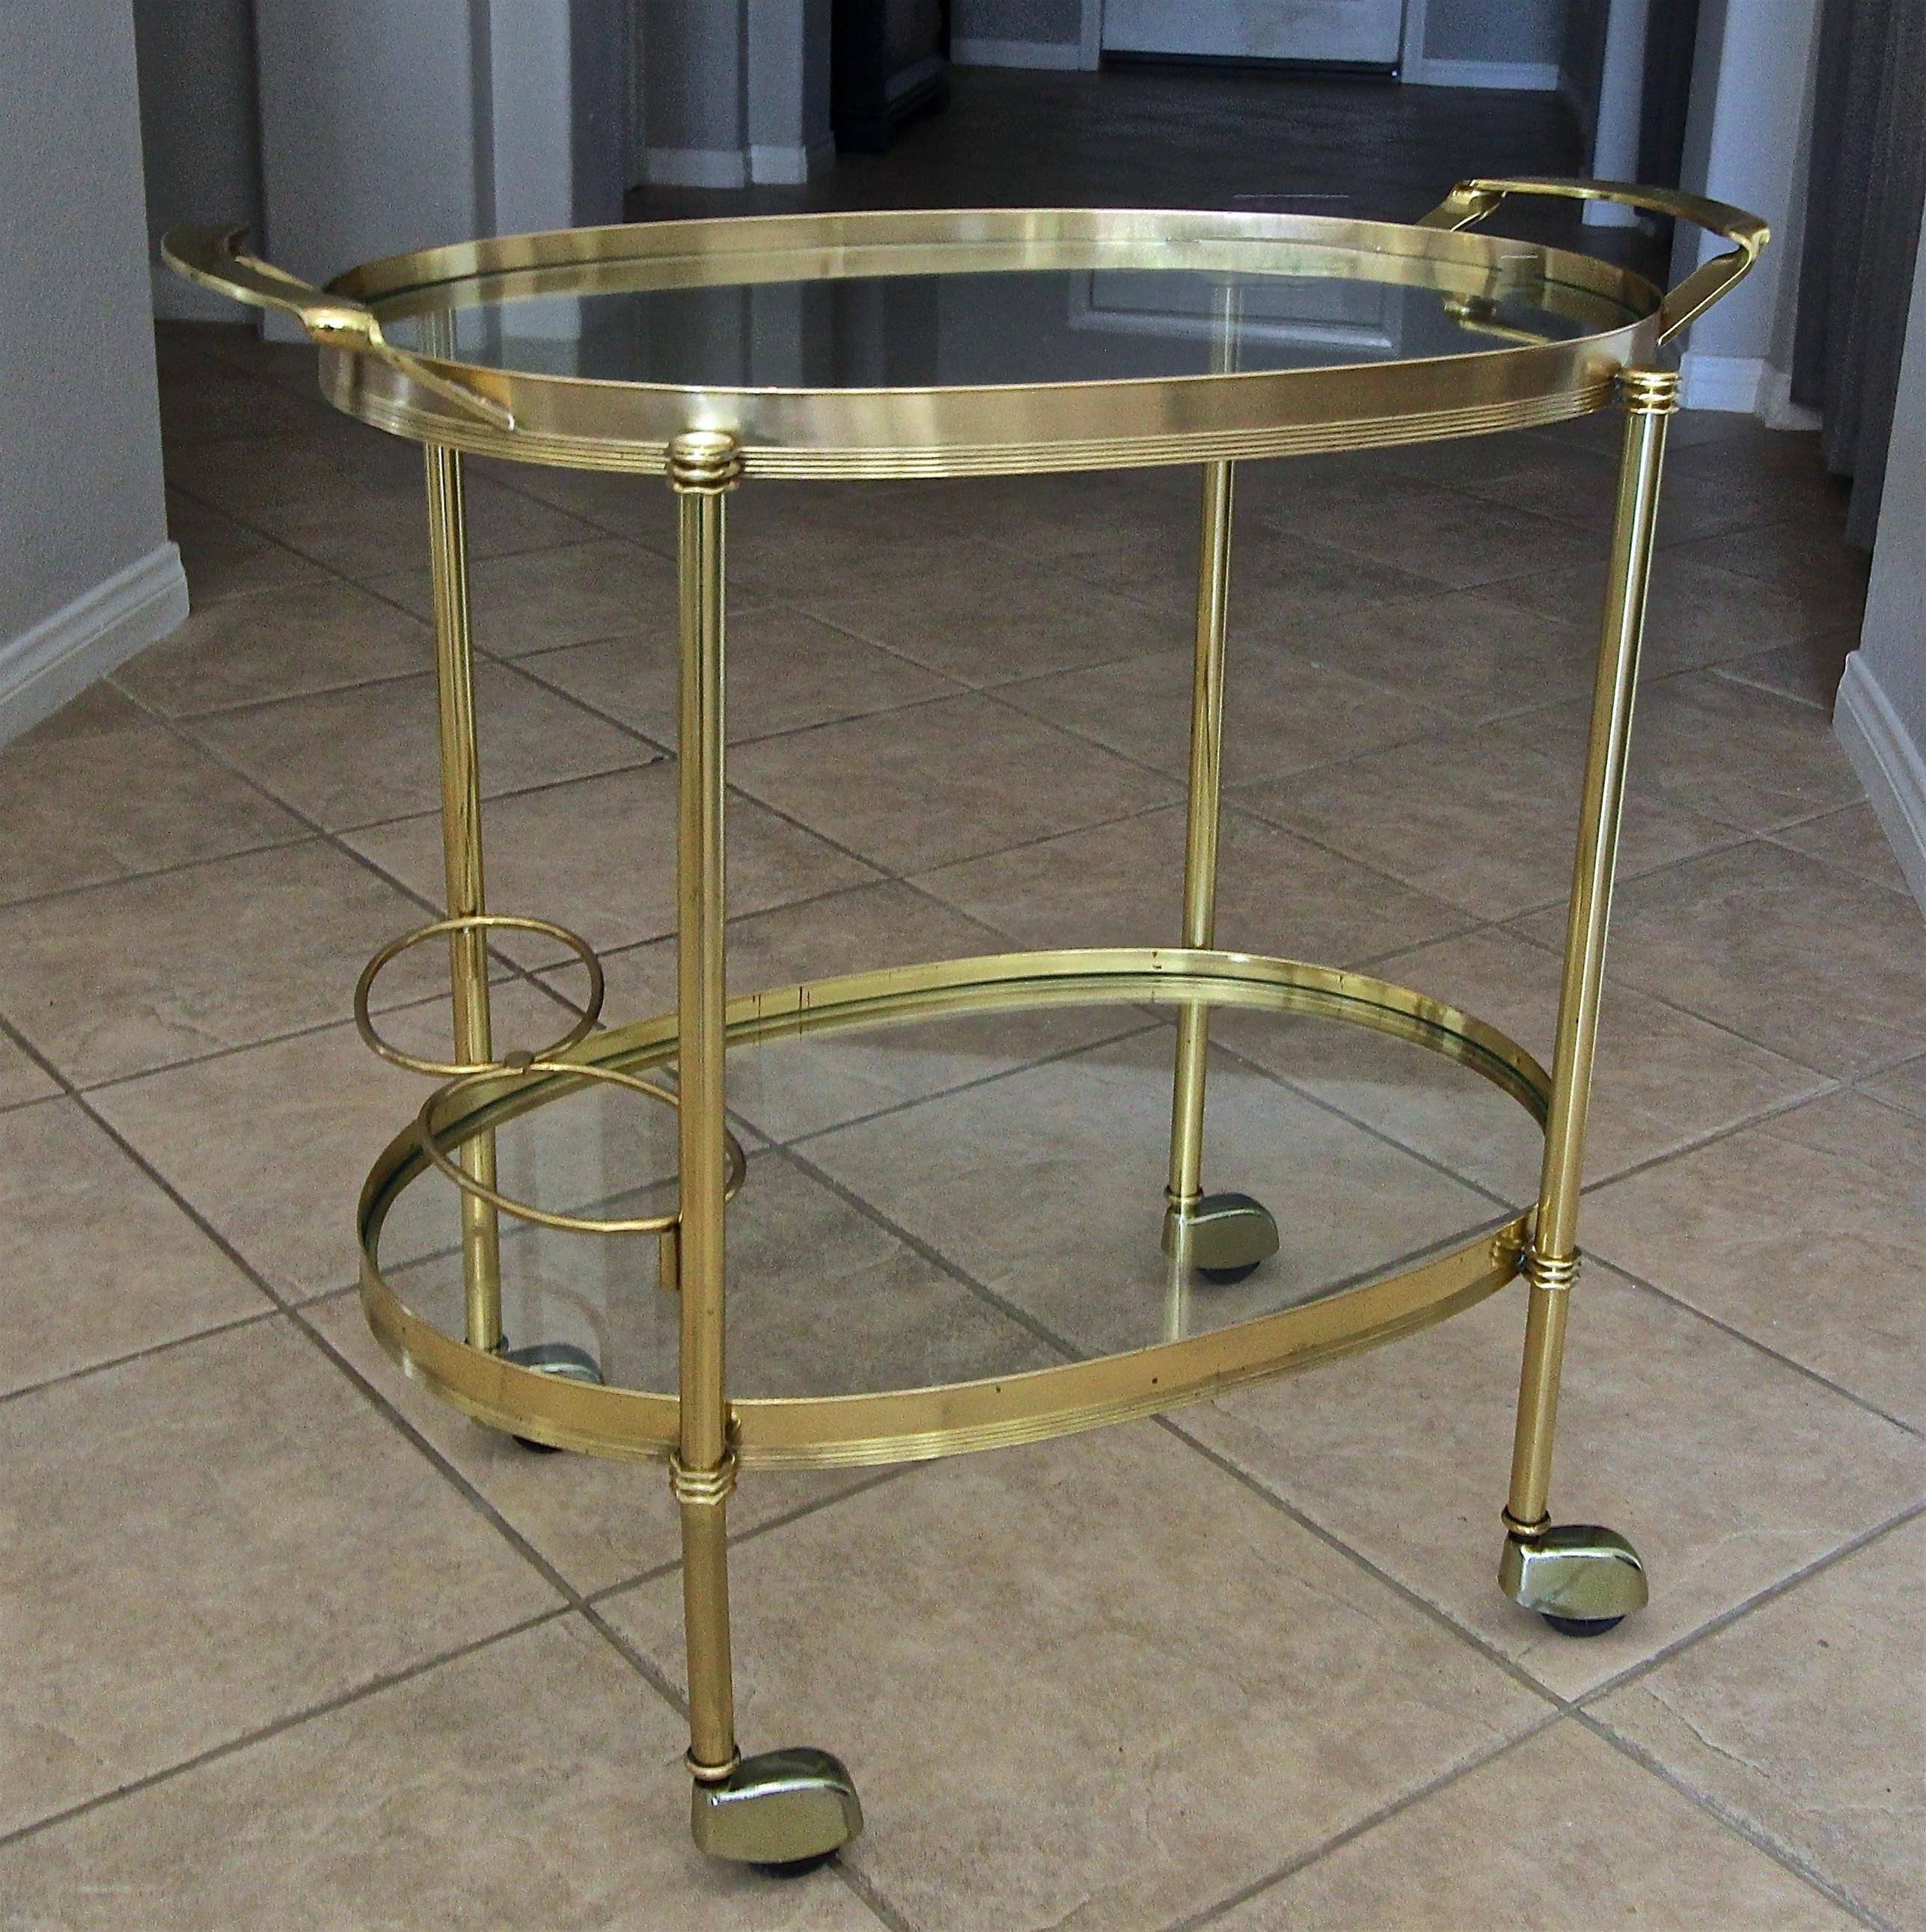 Italian 2-tier solid brass bar (or tea cart) with bottle holder and inset glass shelves. Has nice clean lines, would be a great addition to any traditional or modern setting.
Dimensions: Height to top of handle is 26